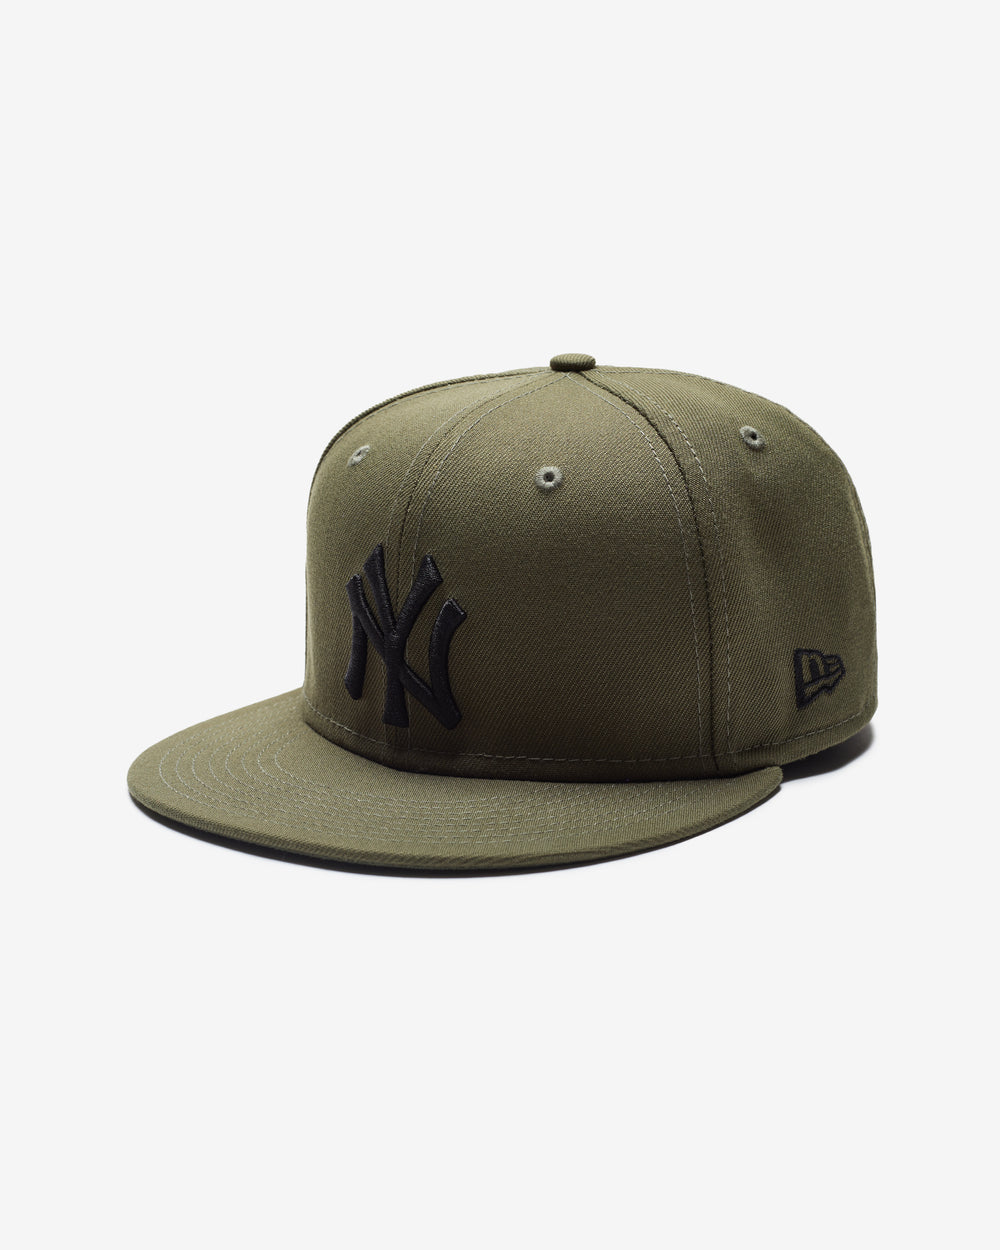 UNDEFEATED X NEW ERA NY YANKEES 59FIFTY FITTED - OLIVE